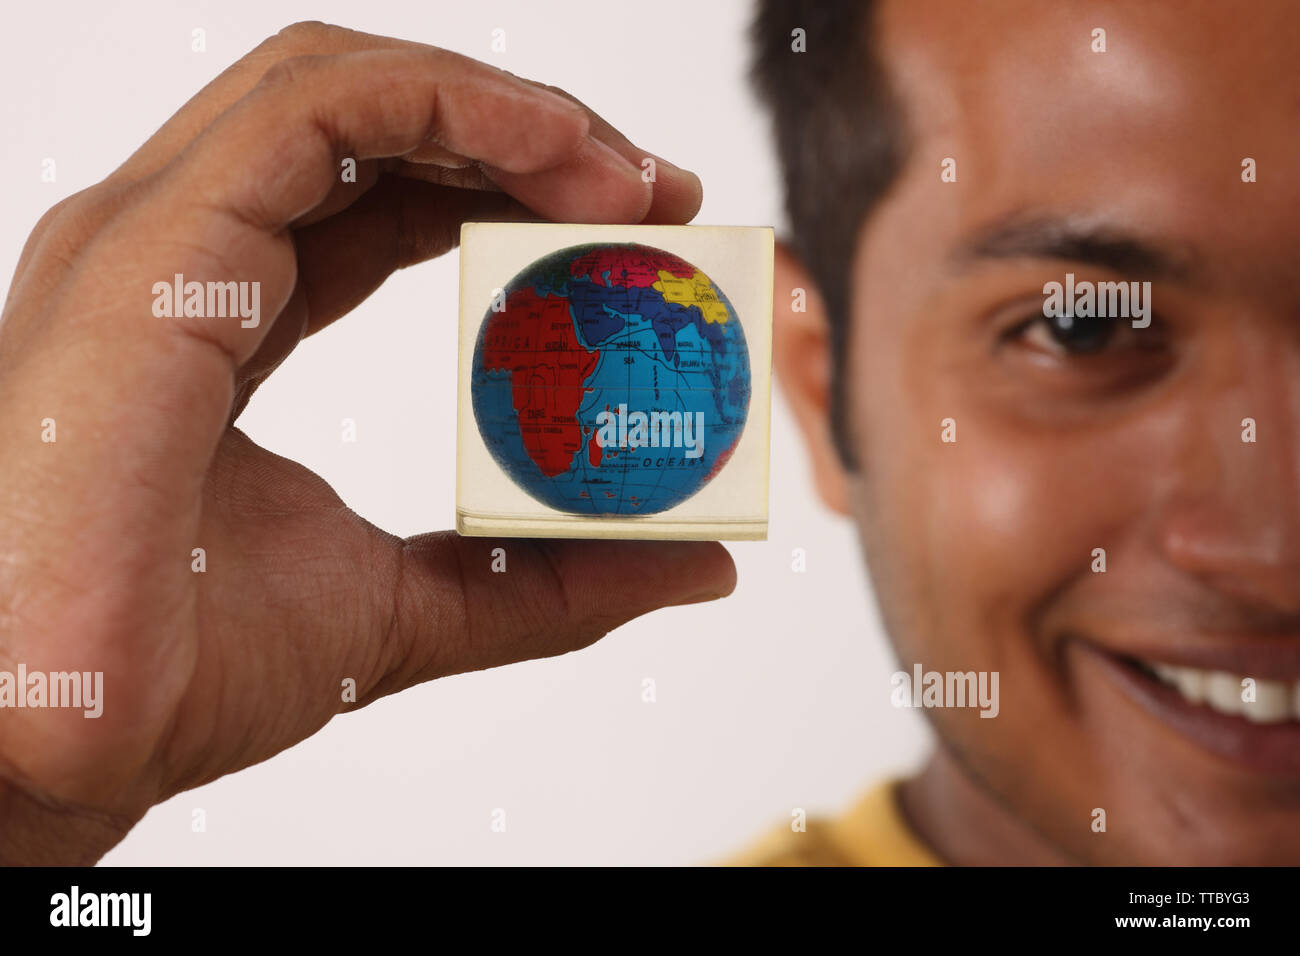 Man showing a paperweight and smiling Stock Photo